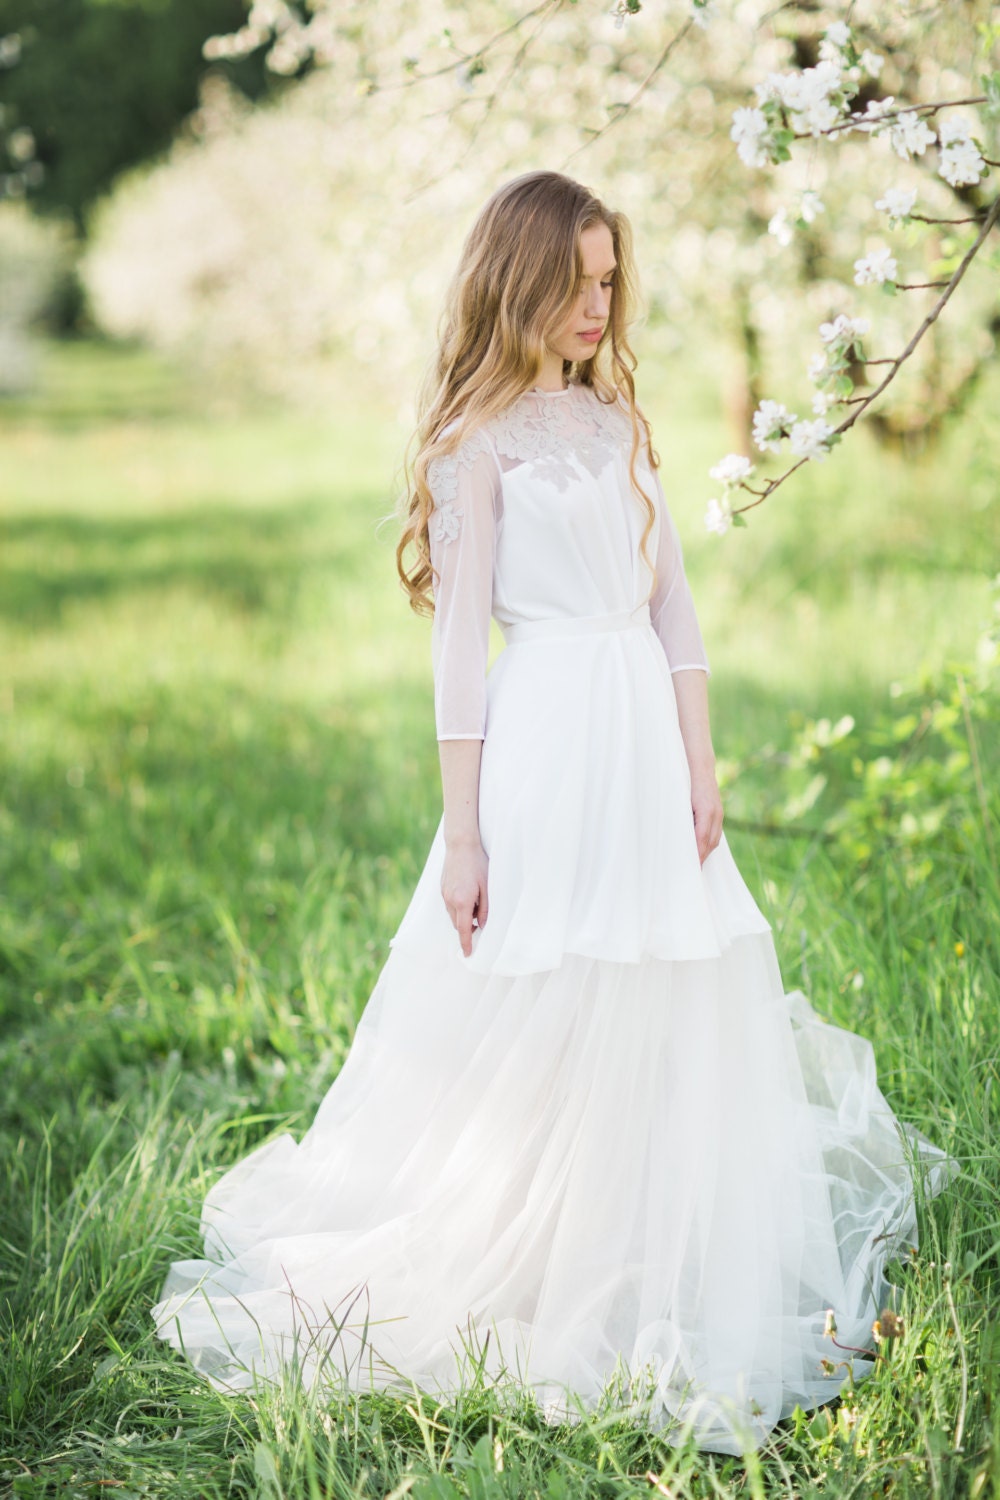 Milk dress with translucent skirt and lavender lace decoration